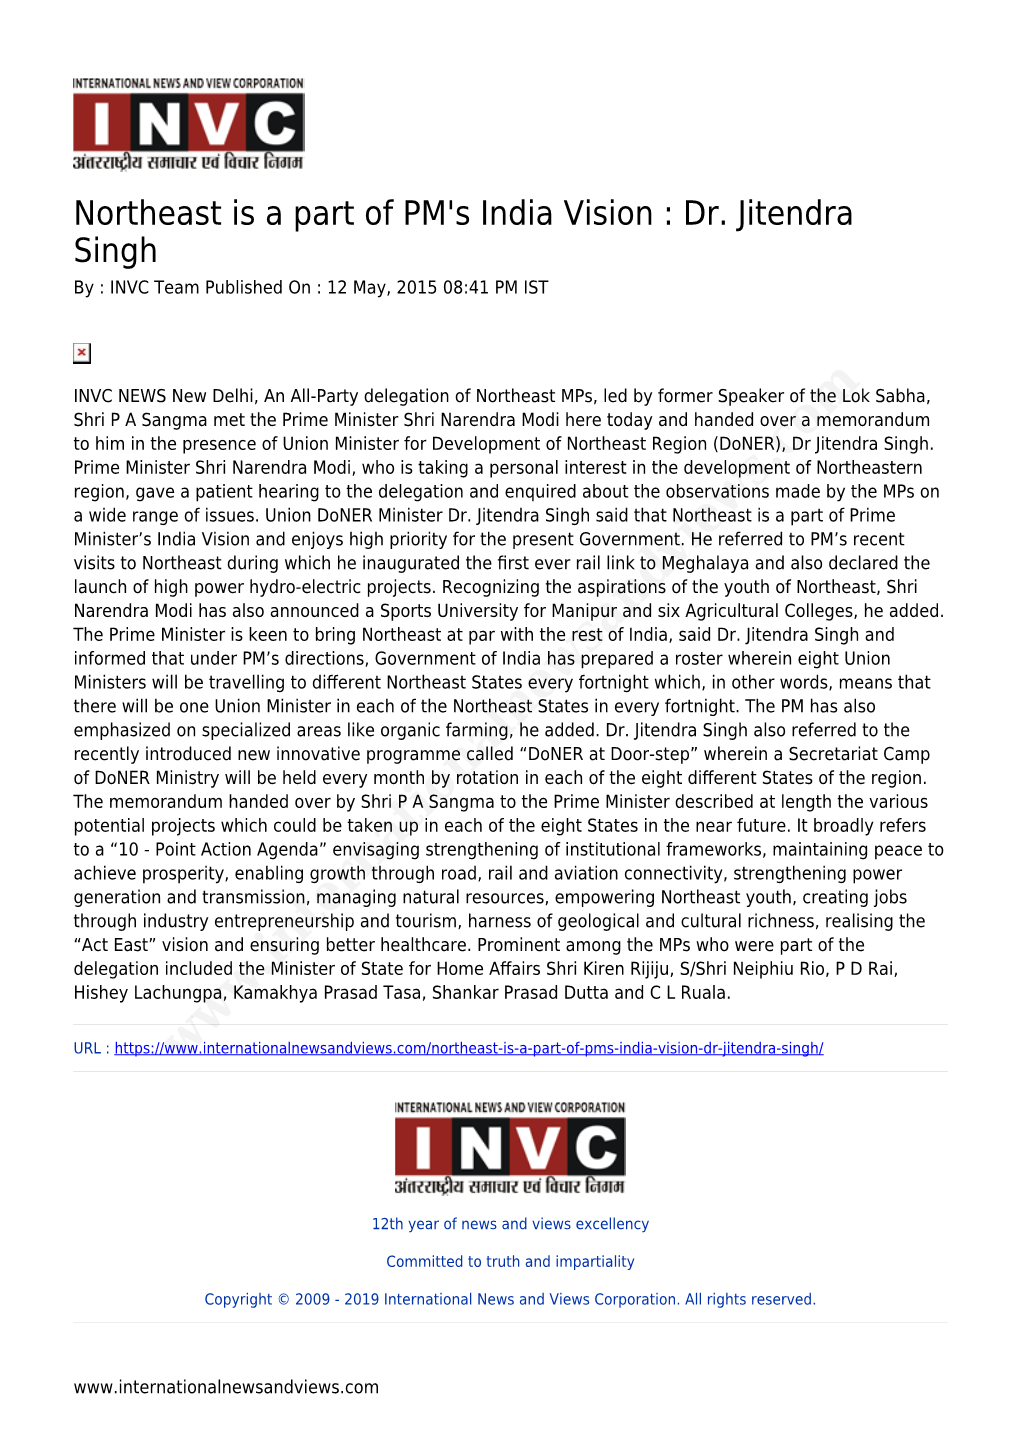 Dr. Jitendra Singh by : INVC Team Published on : 12 May, 2015 08:41 PM IST